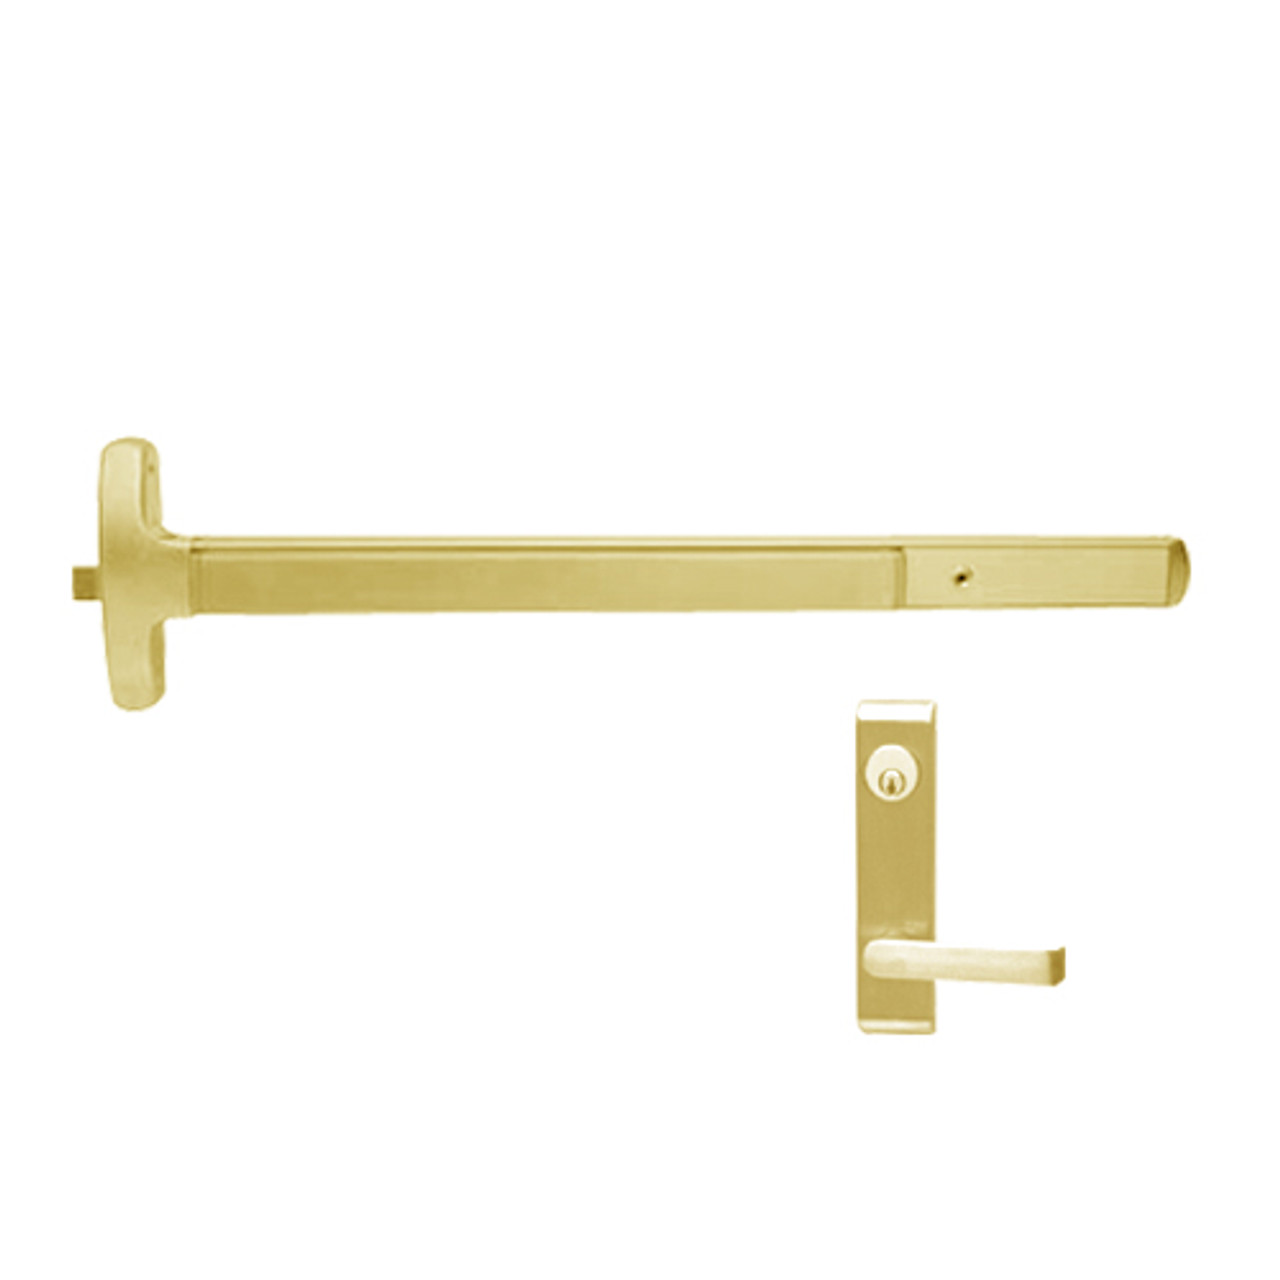 24-R-L-DANE-US3-3-LHR Falcon Exit Device in Polished Brass